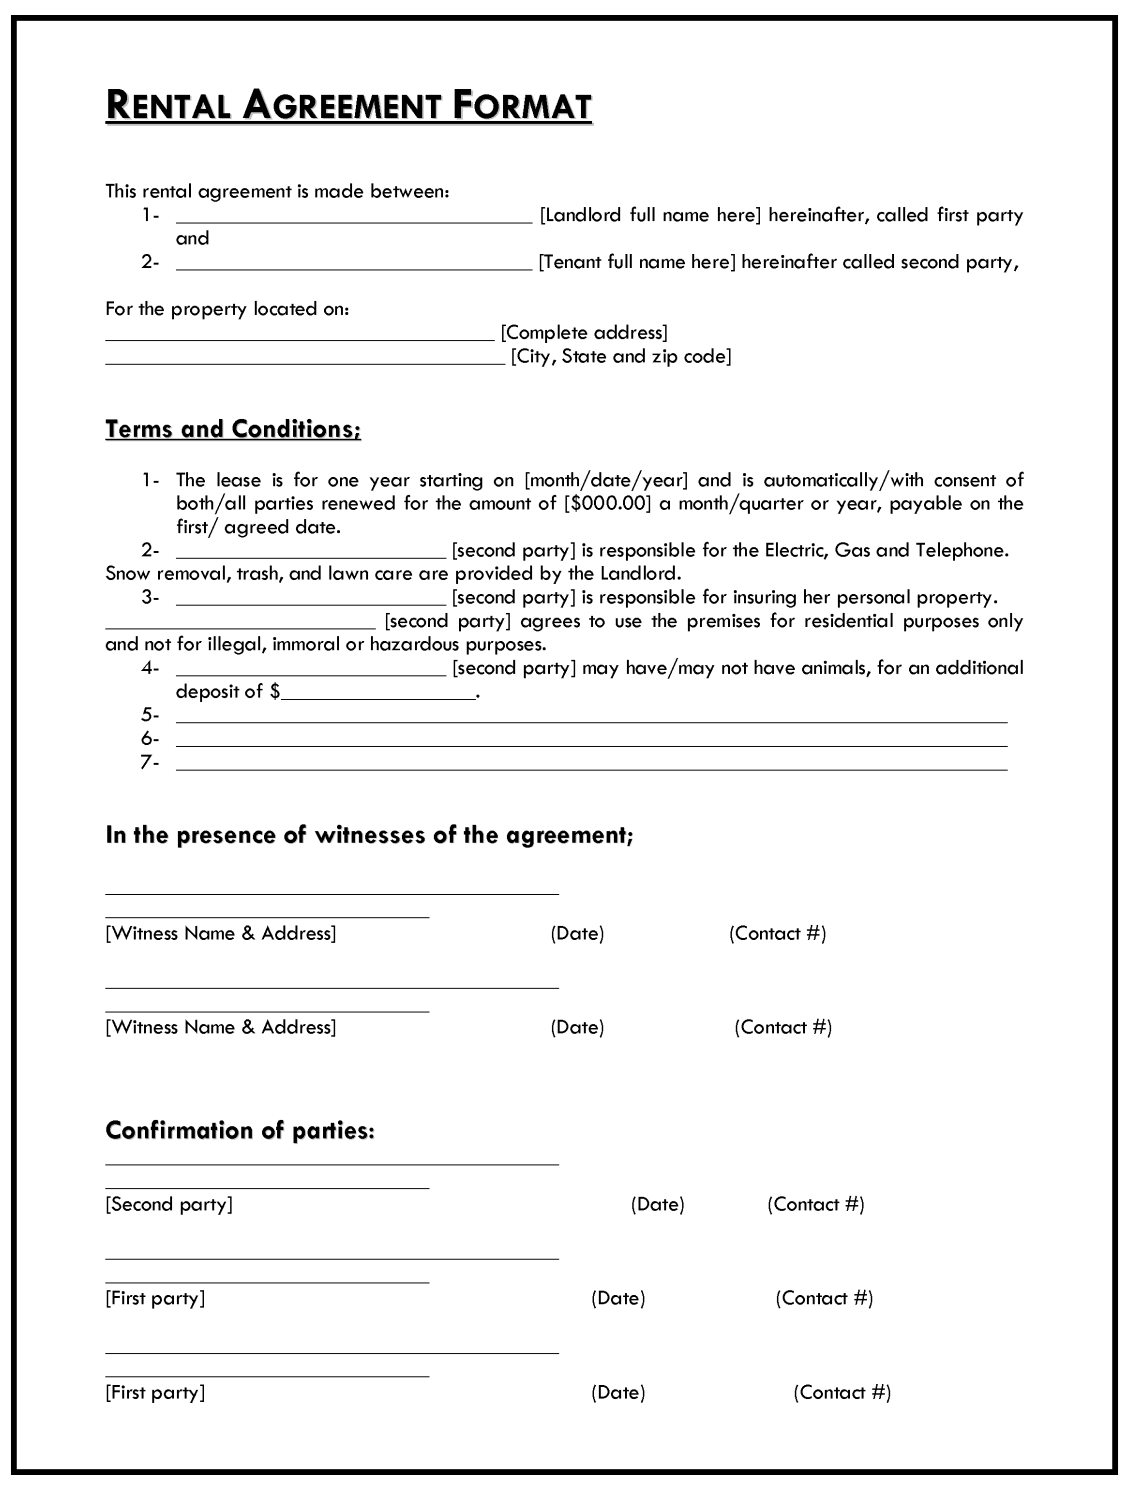 Rent Agreement Format In English Word